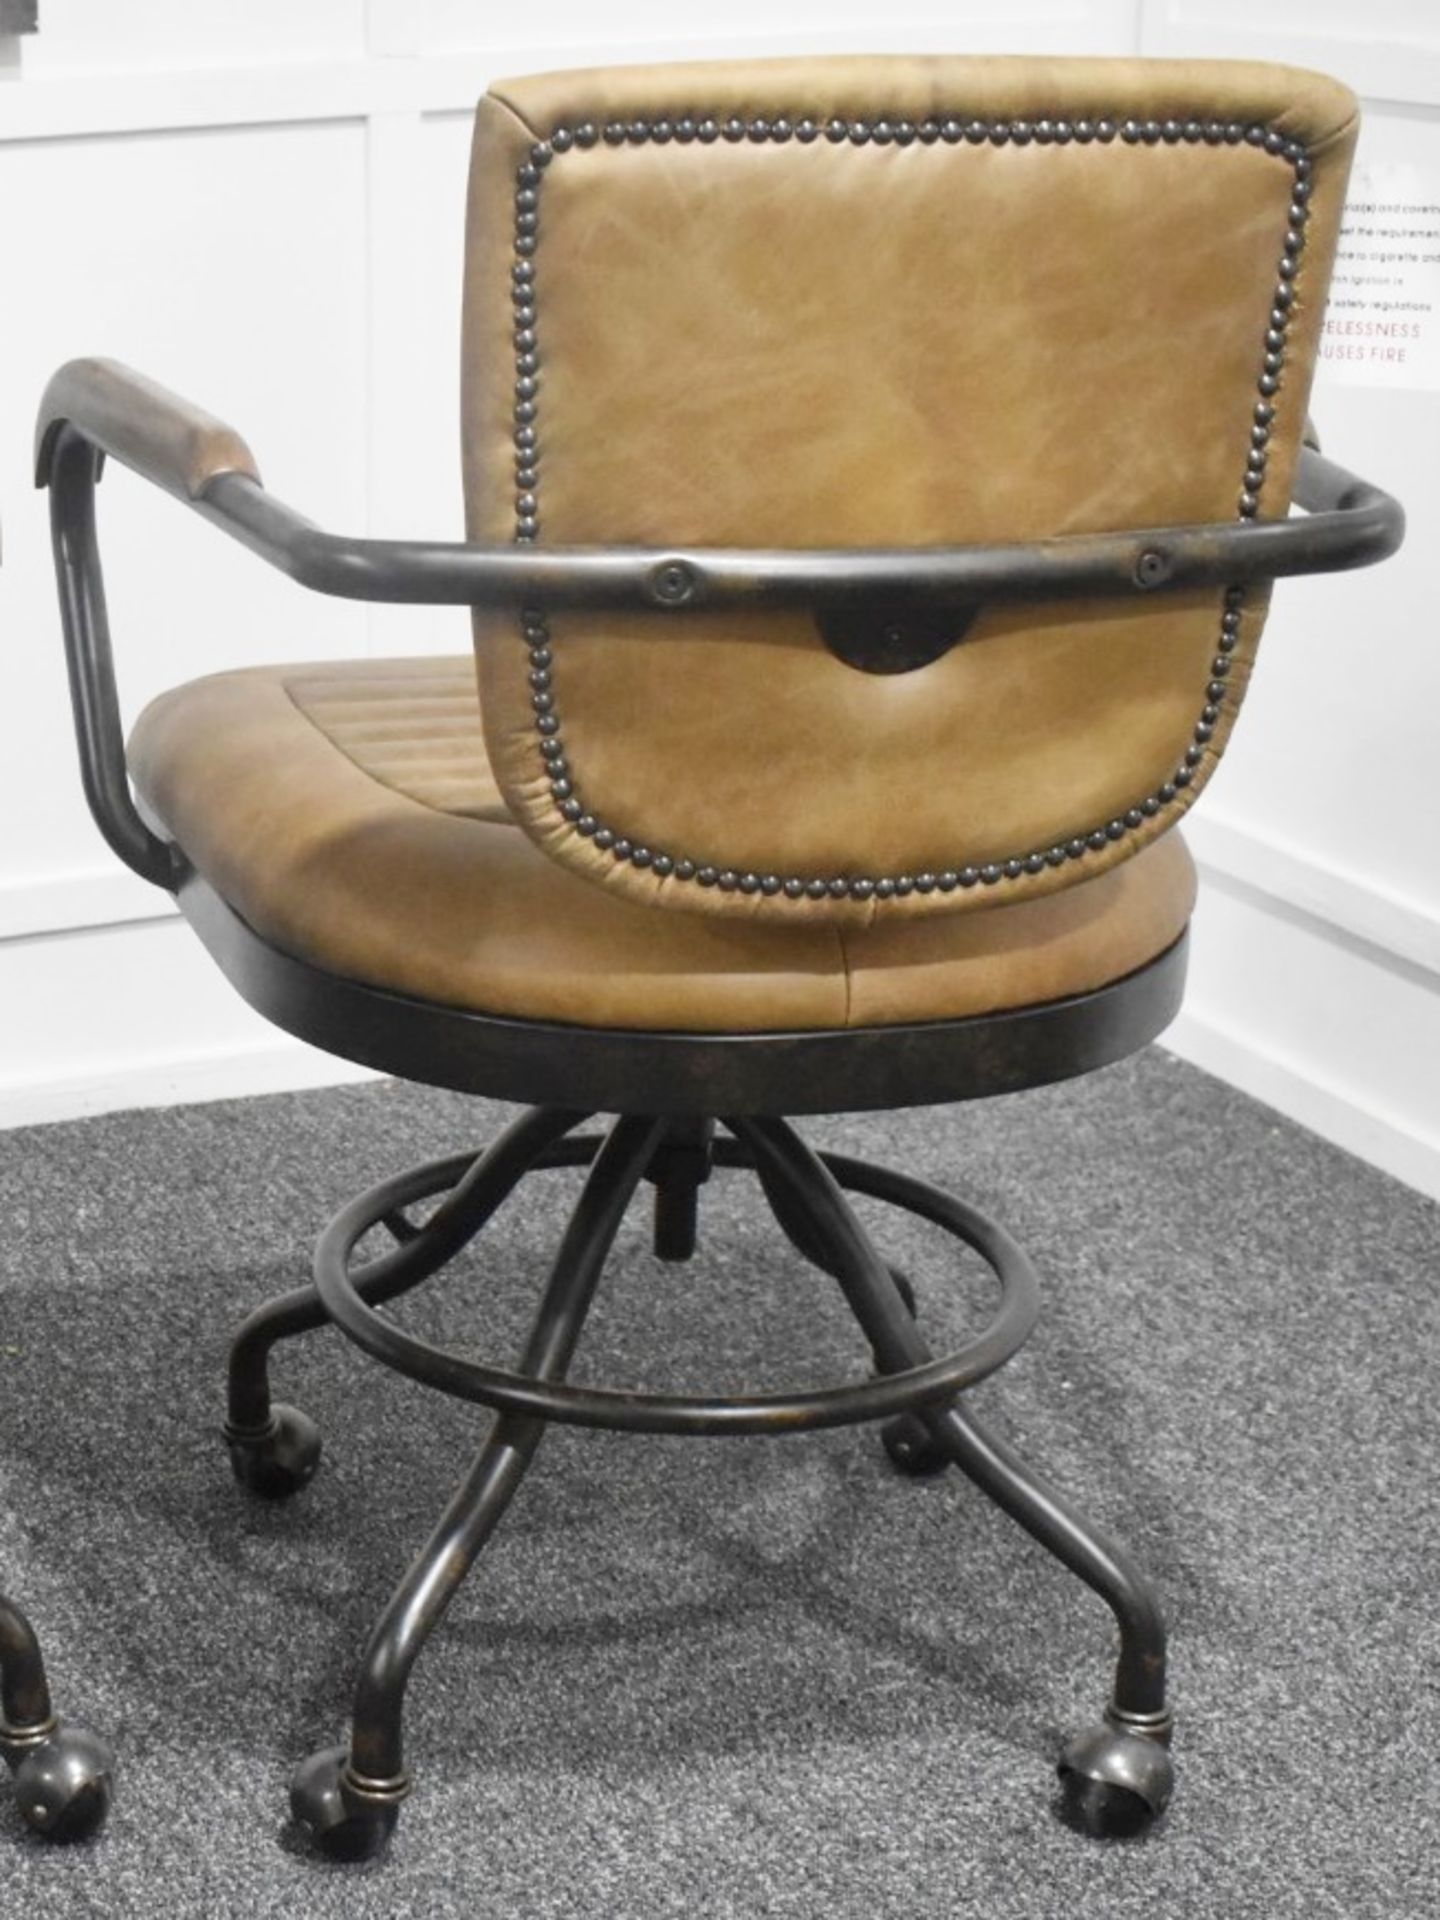 1 x Industrial-style Genuine Leather Upholstered Swivel Desk Chair - Original RRP £629.00 - Recently - Image 9 of 9